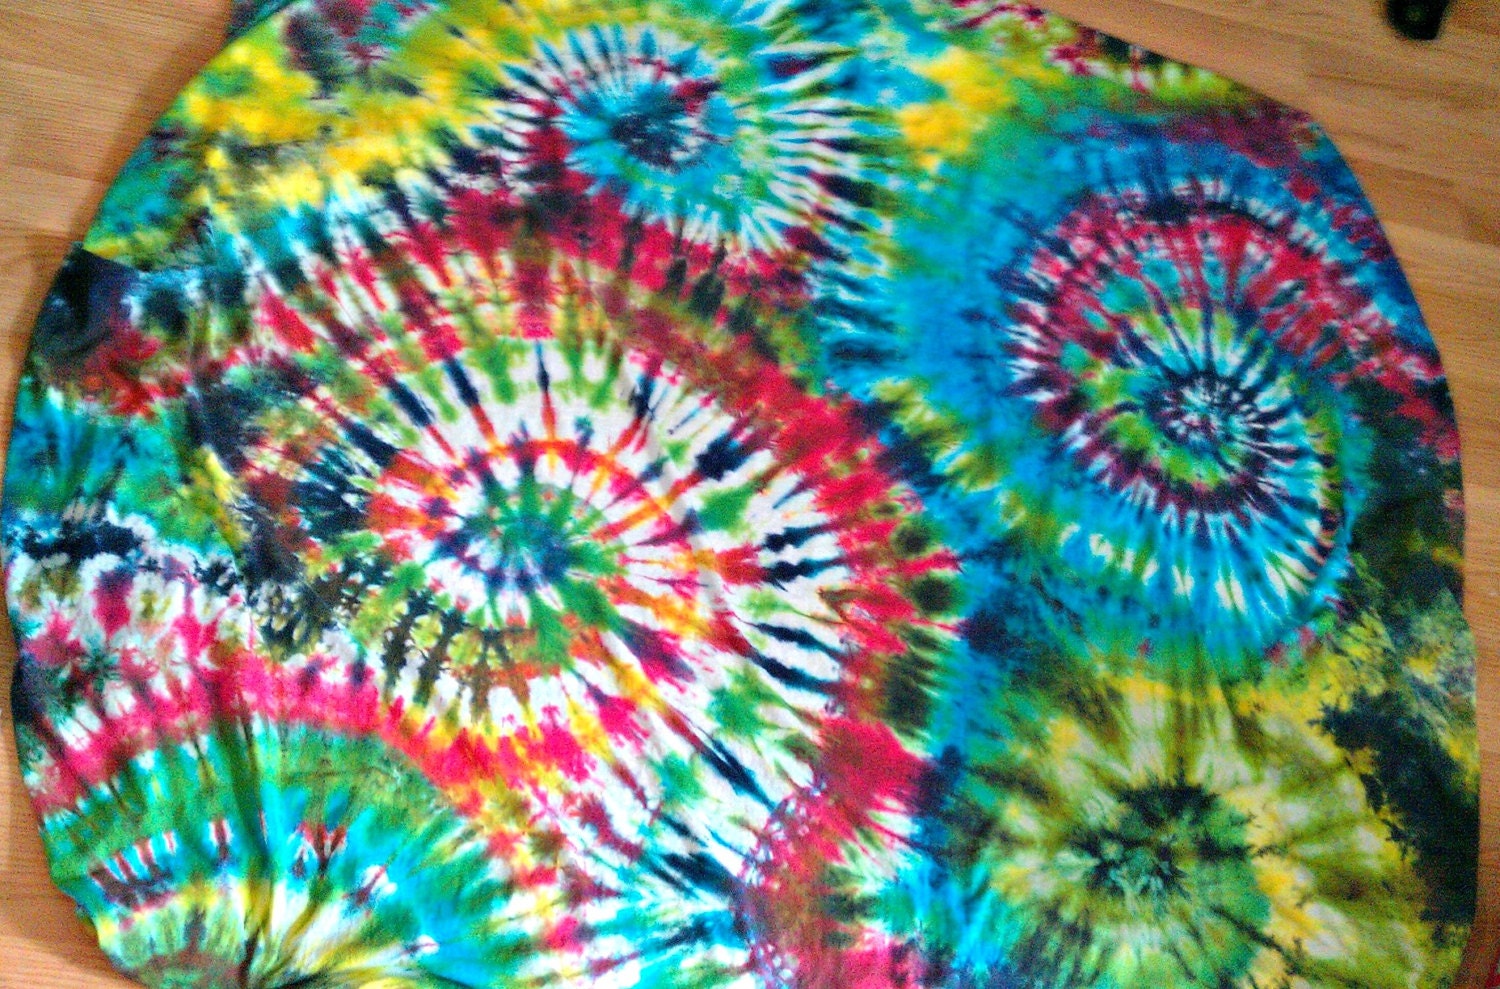 Made to order tie dye bed sheets by ToLiveIsToDye on Etsy